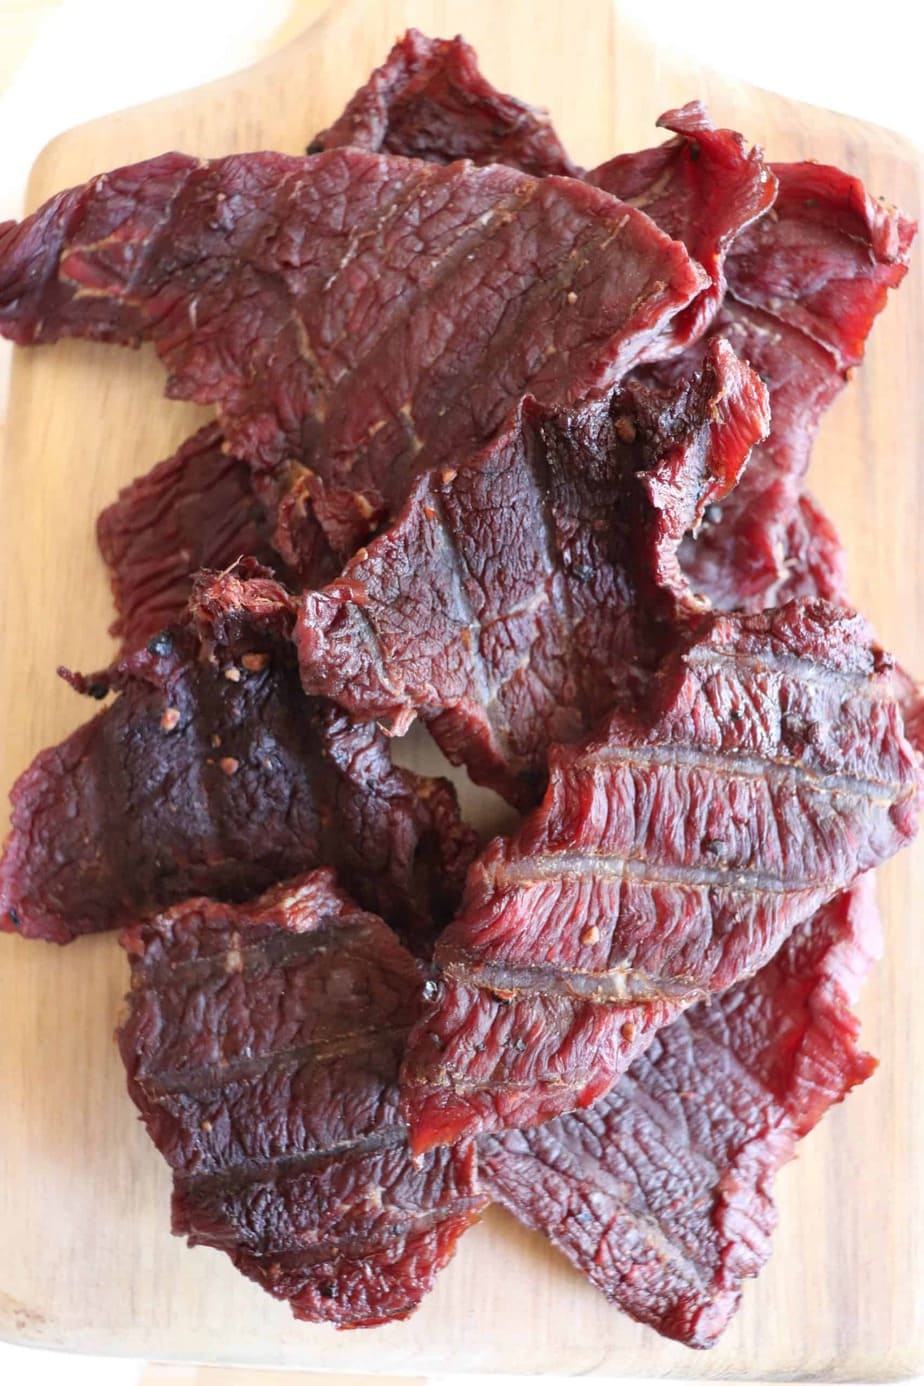 Pieces of keto beef jerky recipe on a wooden board.